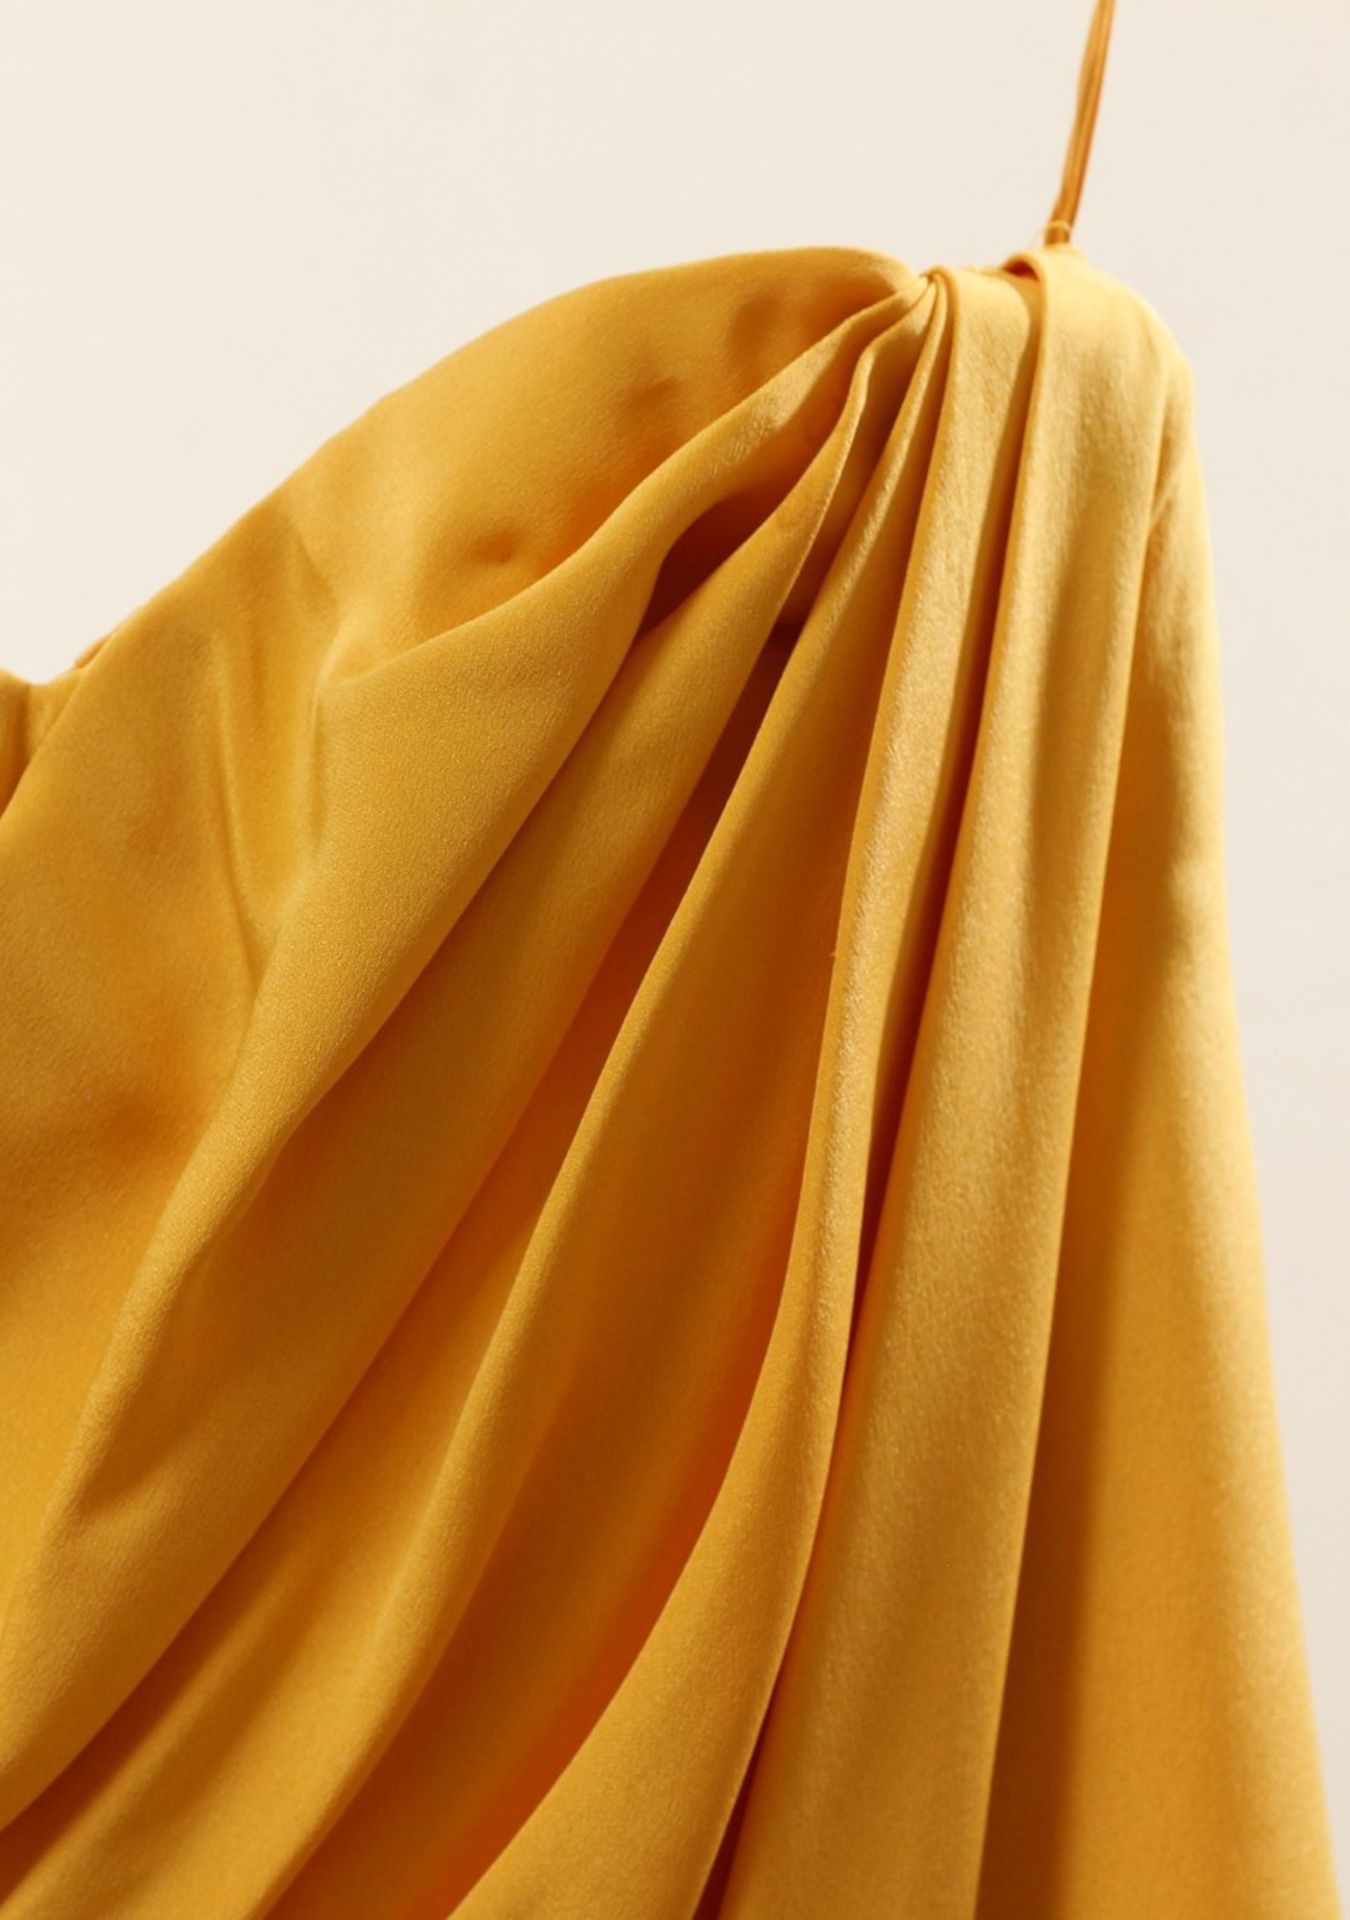 1 x Boutique Le Duc Yellow Dress - Size: 8 - Material: 100% Silk - From a High End Clothing Boutique - Image 3 of 7